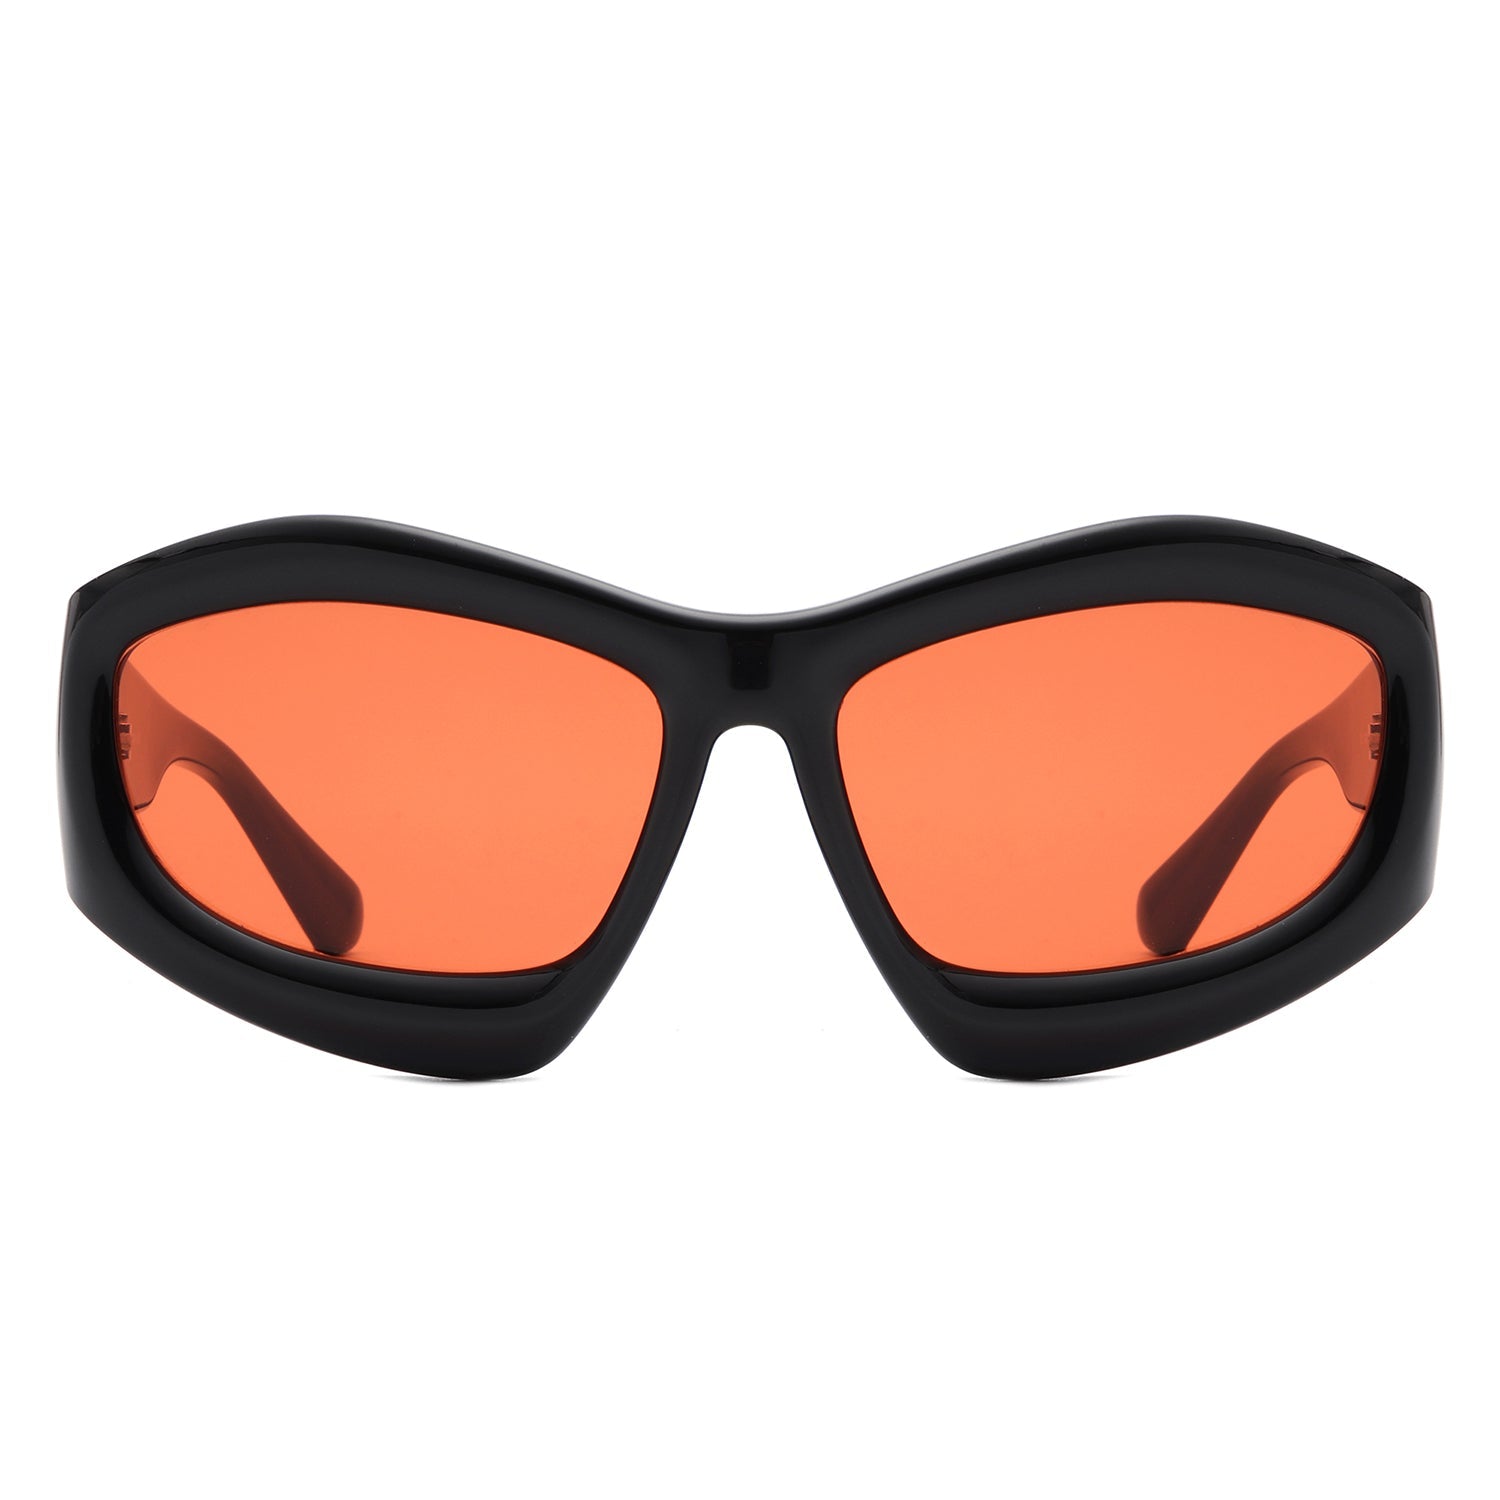 Sunglasses, High Definition Fishing Glasses for Outdoor Sports